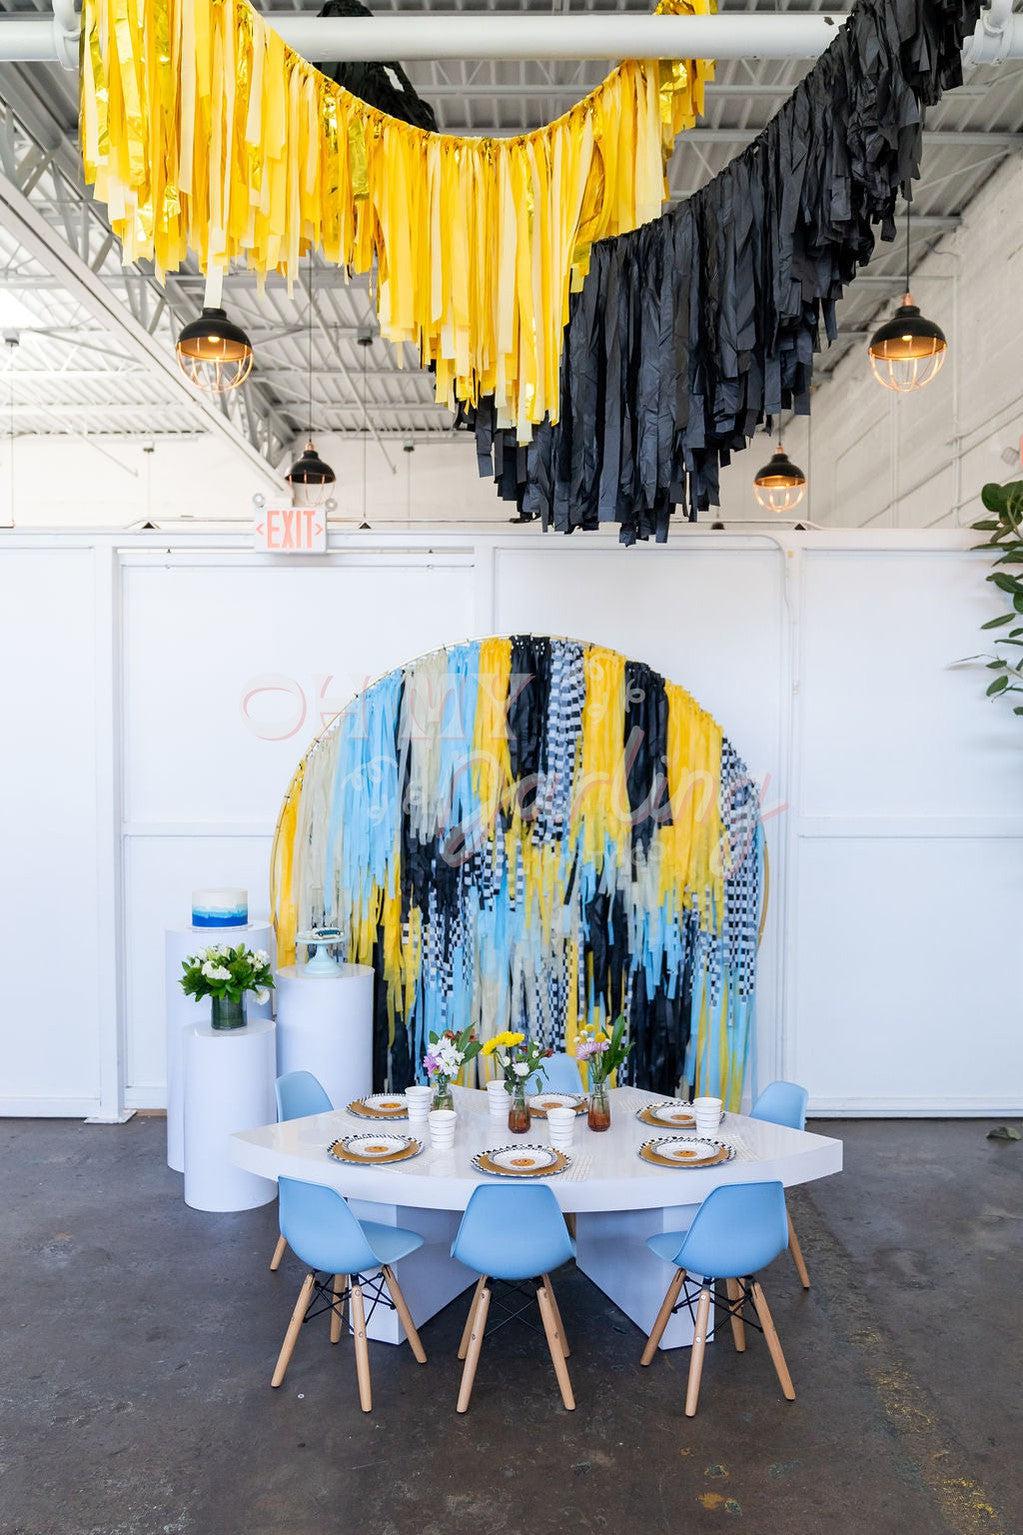 One Cool Dude Semi Circle Fringe Backdrop-Fringe Backdrop-Party Decor-Oh My Darling Party Co-Oh My Darling Party Co-baby, baby blue, backdrops for party, balloon garlands, Birthday, birthday decorations, black and yellow, blue and peach, blue and white, blue party, checkered, cool dude, dusty blue, first birthday, fringe garland, Fringe Streamers, gender neutral birthday, happy dude, Kids Birthday, Kids Party, ocean, OMDPC, party backdrops, preppy, preppy party, semi circle, semicircle backdrop, skater, smi